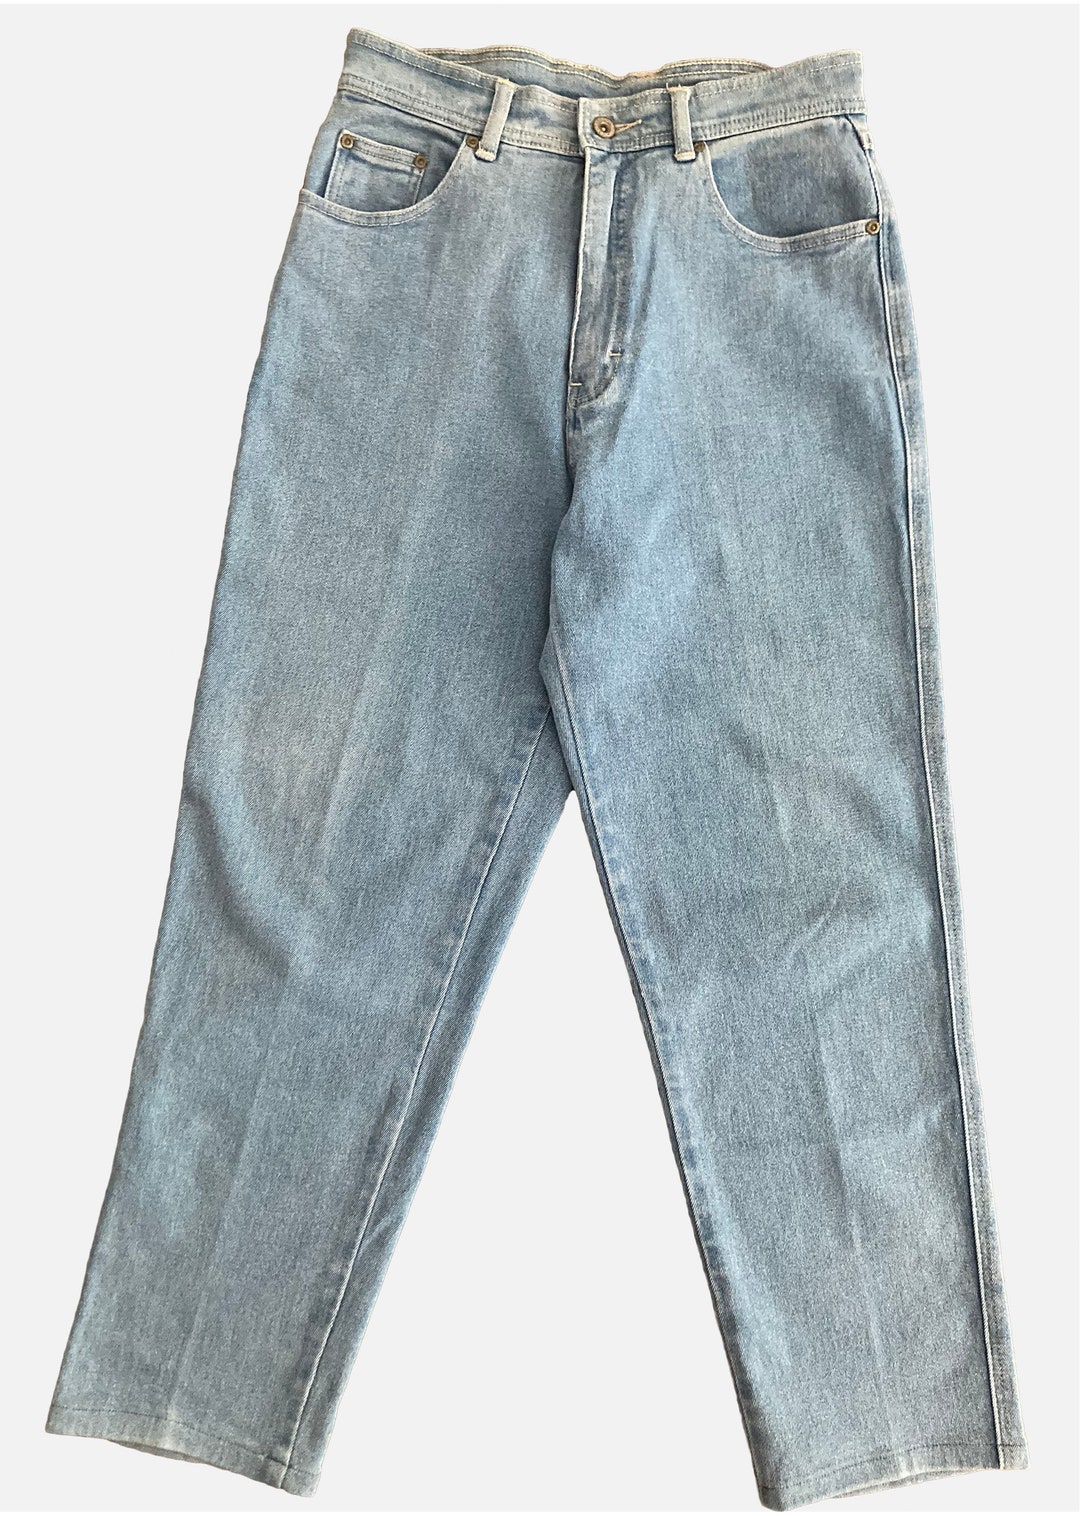 Vintage Bill Bliss Mid to High Rise Denim Blue Jeans - Etsy